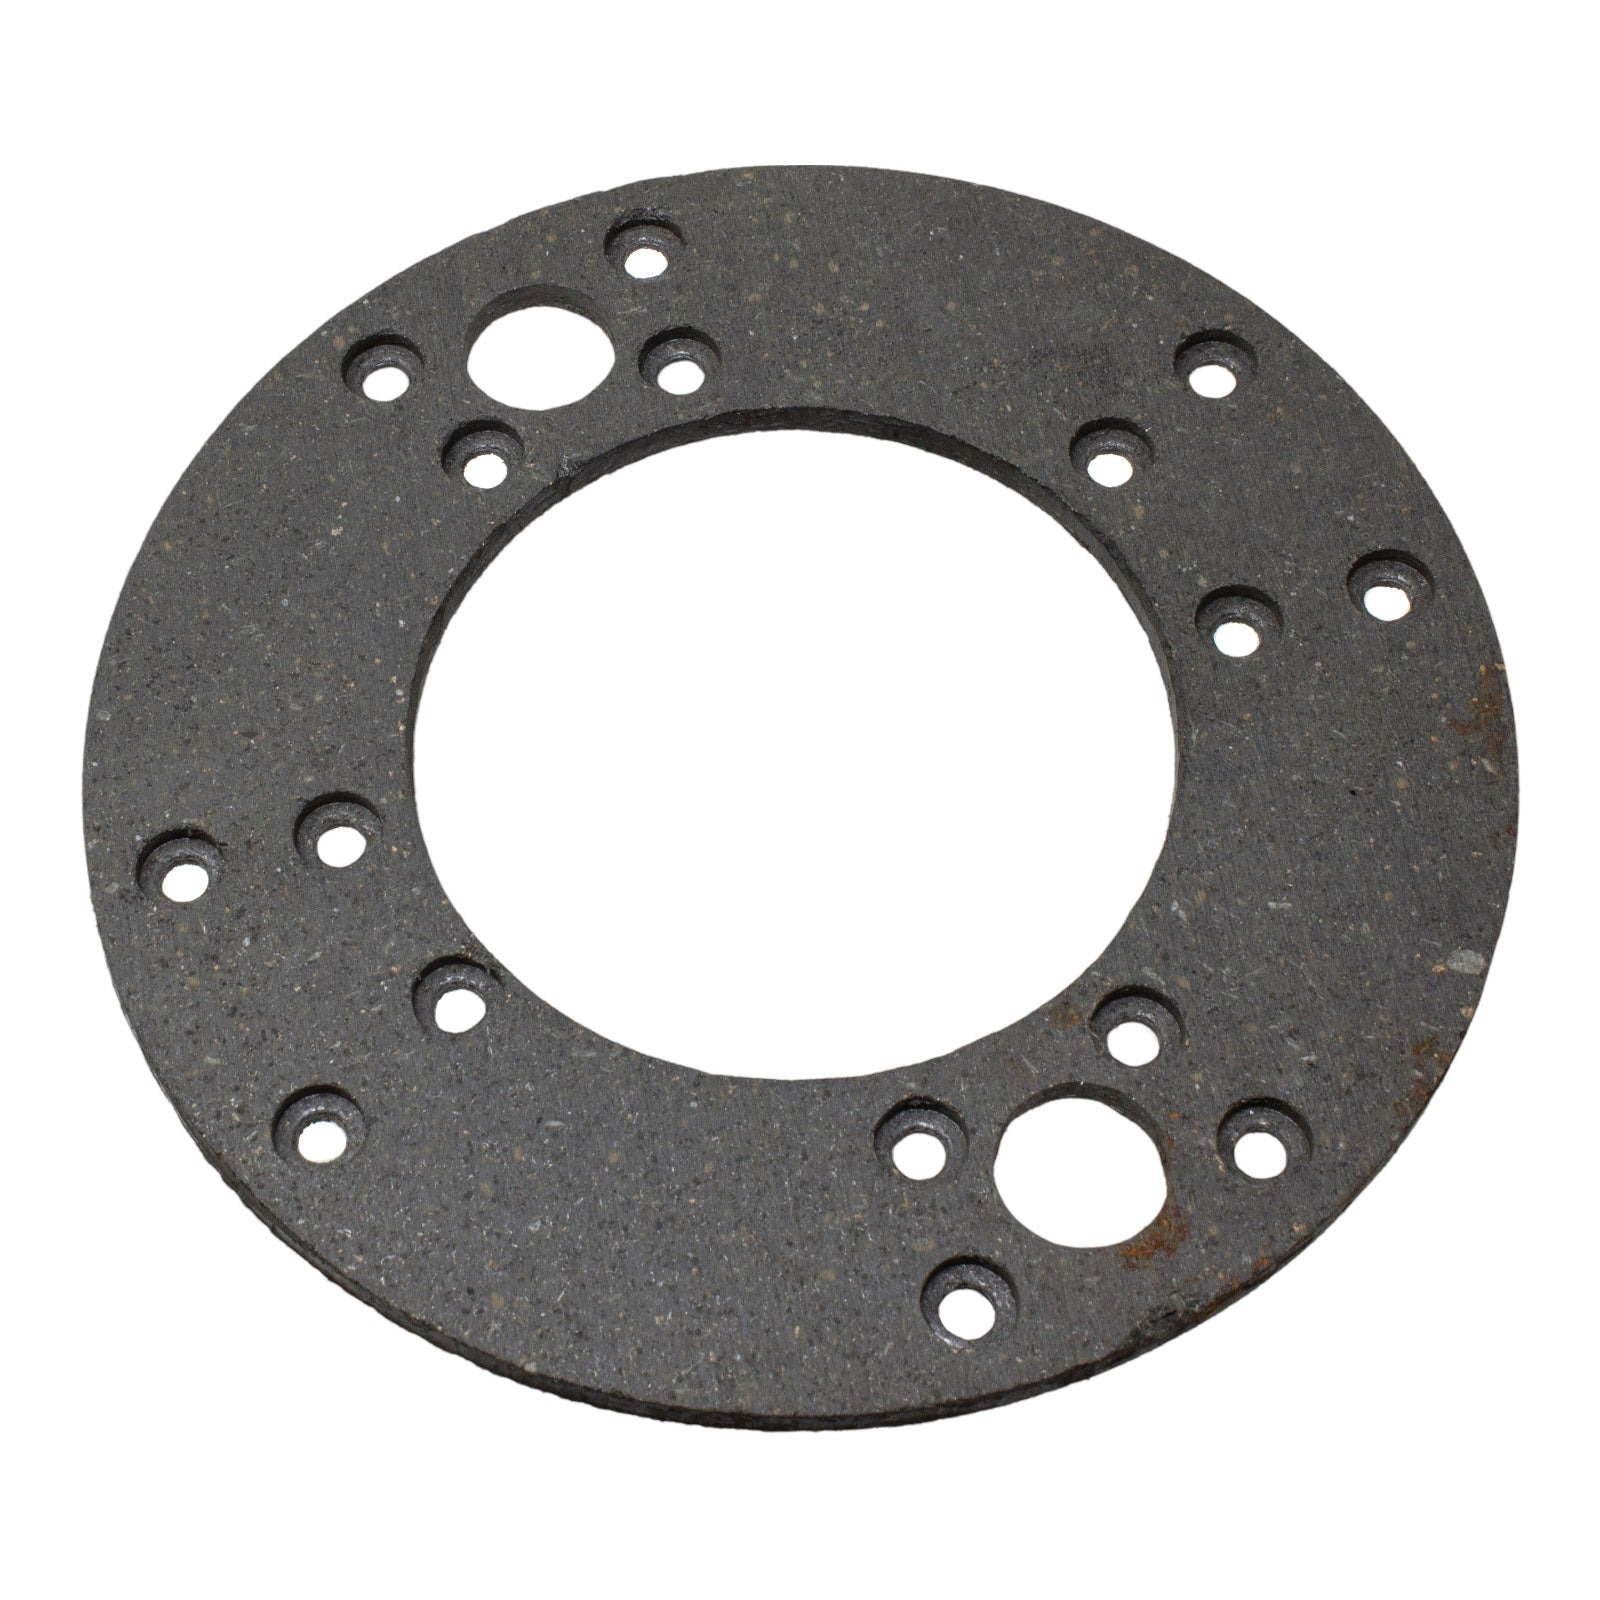 249019A1, Brake Lining For Case at Duraforce